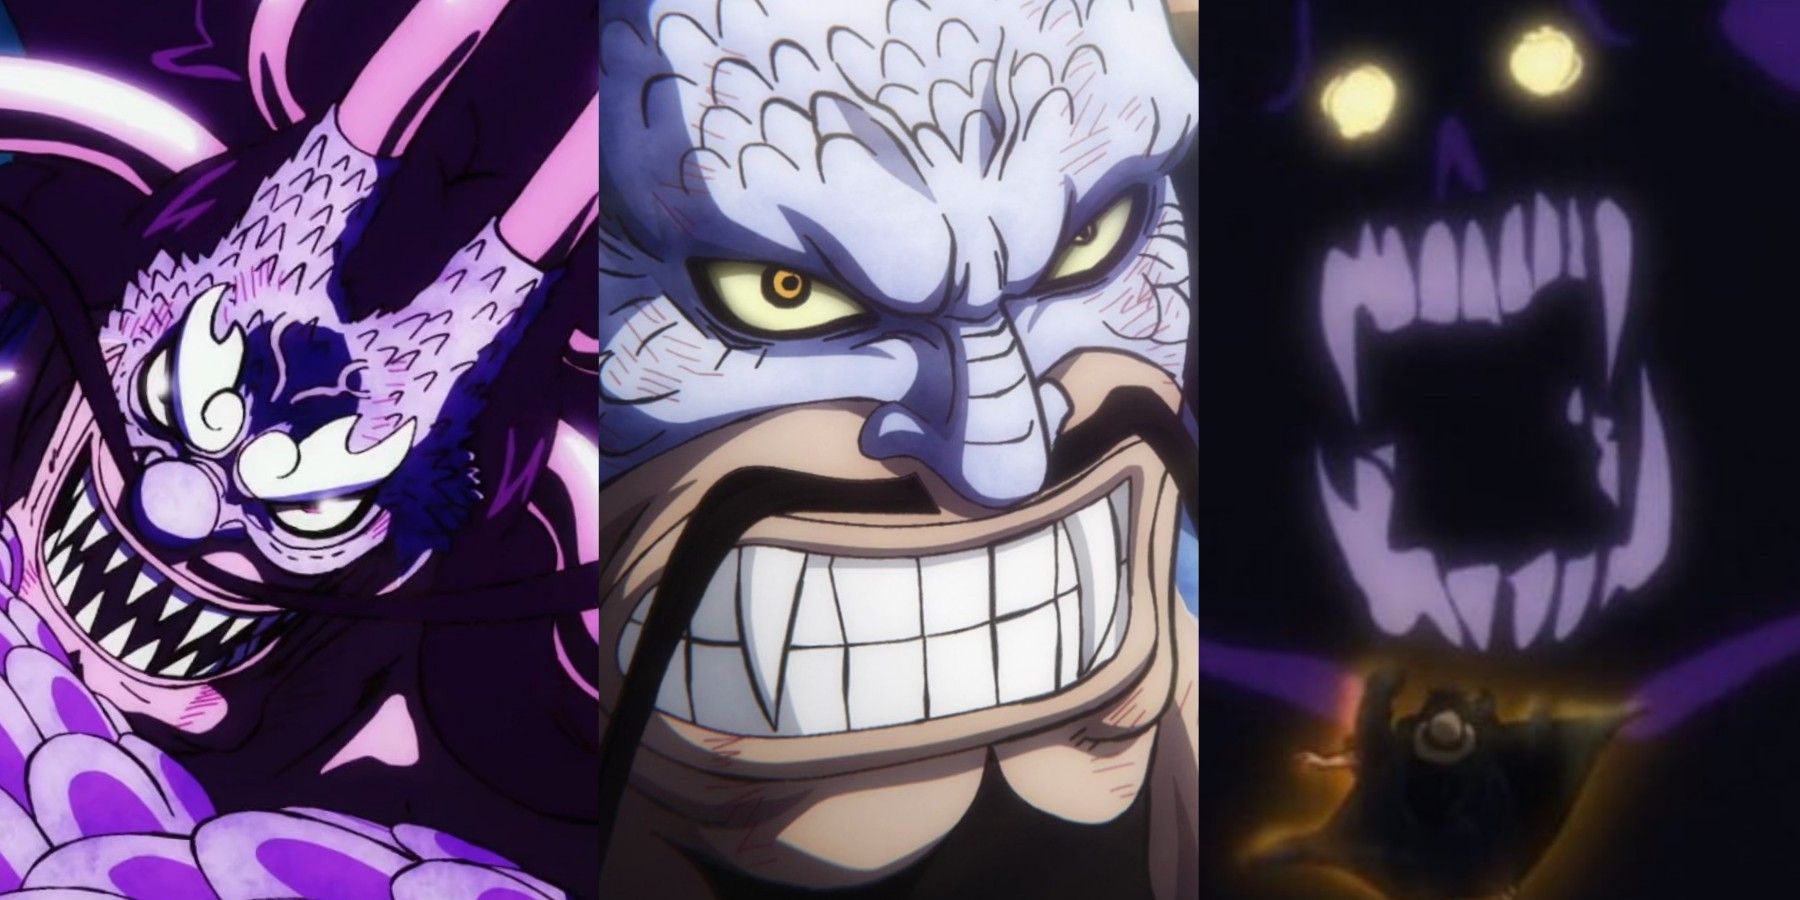 Big Mom is physically the strongest Yonko, so why do people